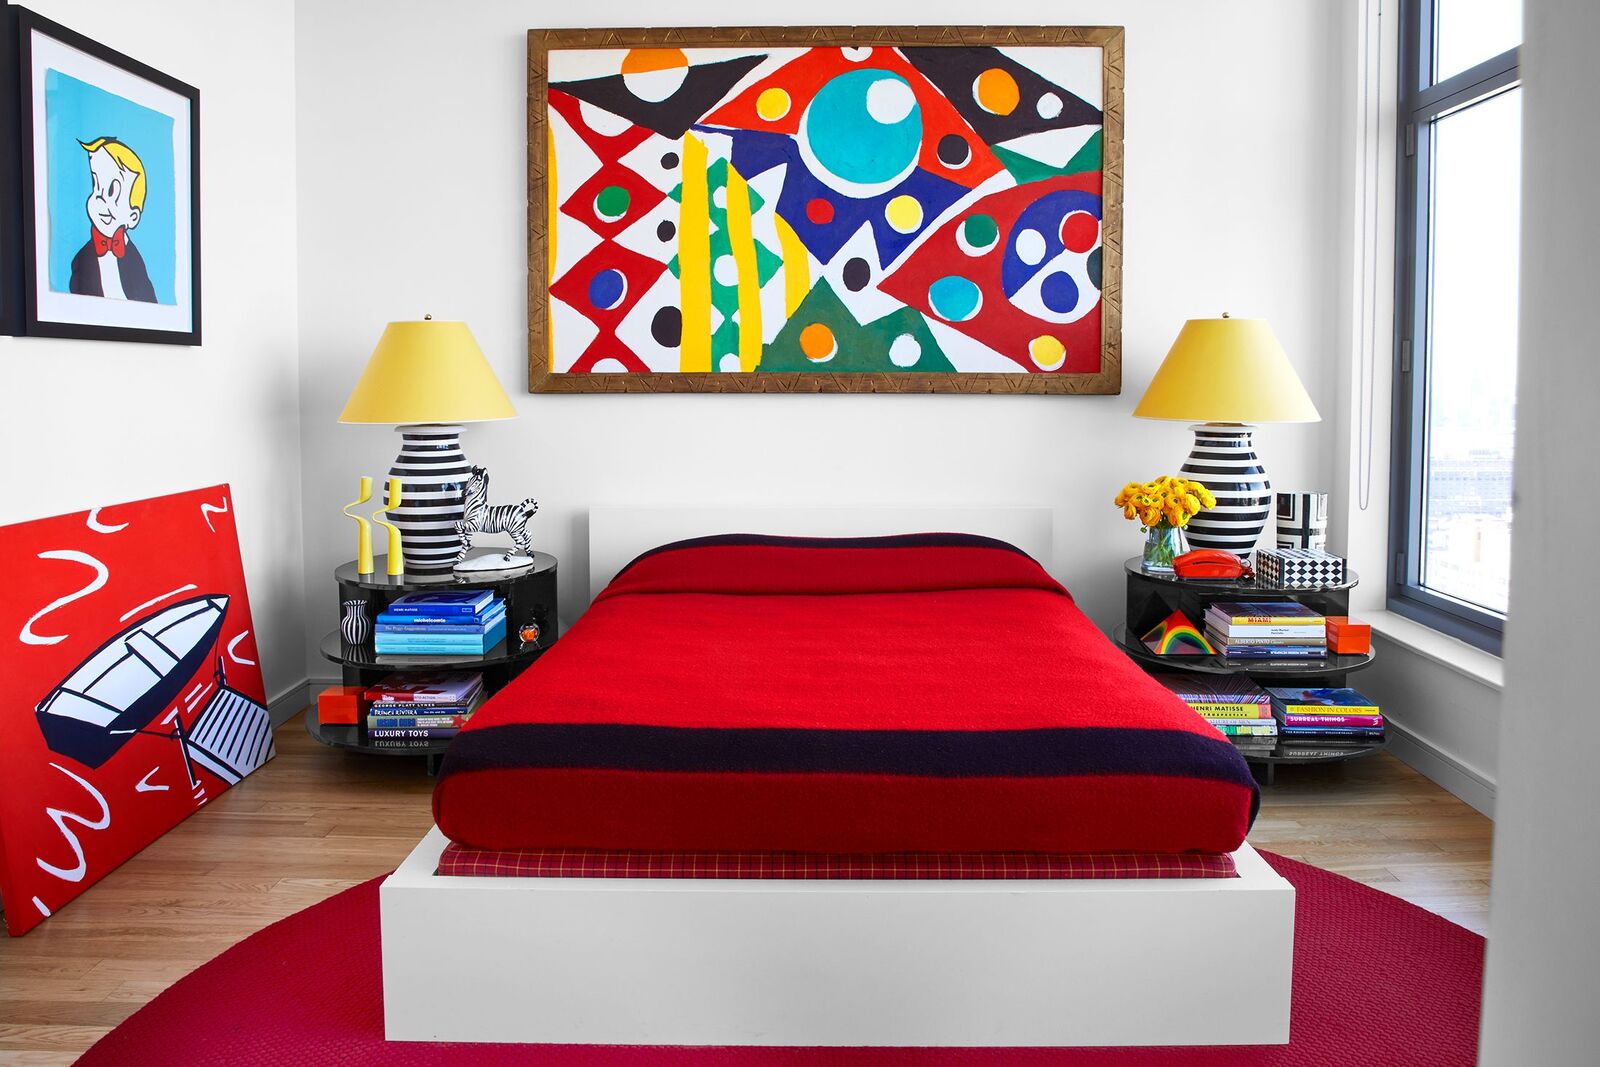 4 Lessons On Using Color In A Bedroom From An Interior Designer